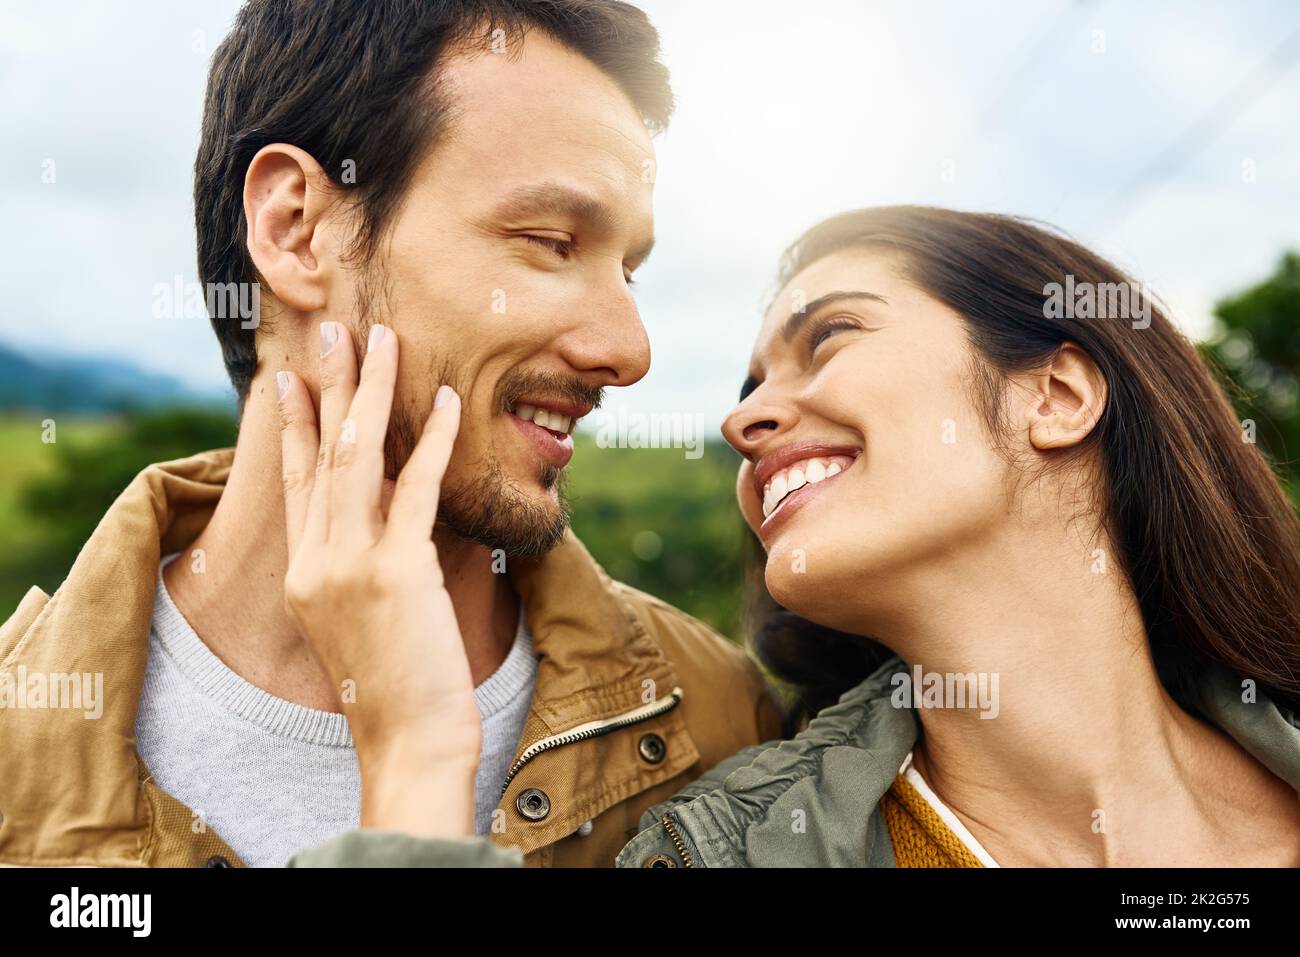 Nothing beats being in love with your best friend. Shot of an affectionate young couple outdoors. Stock Photo